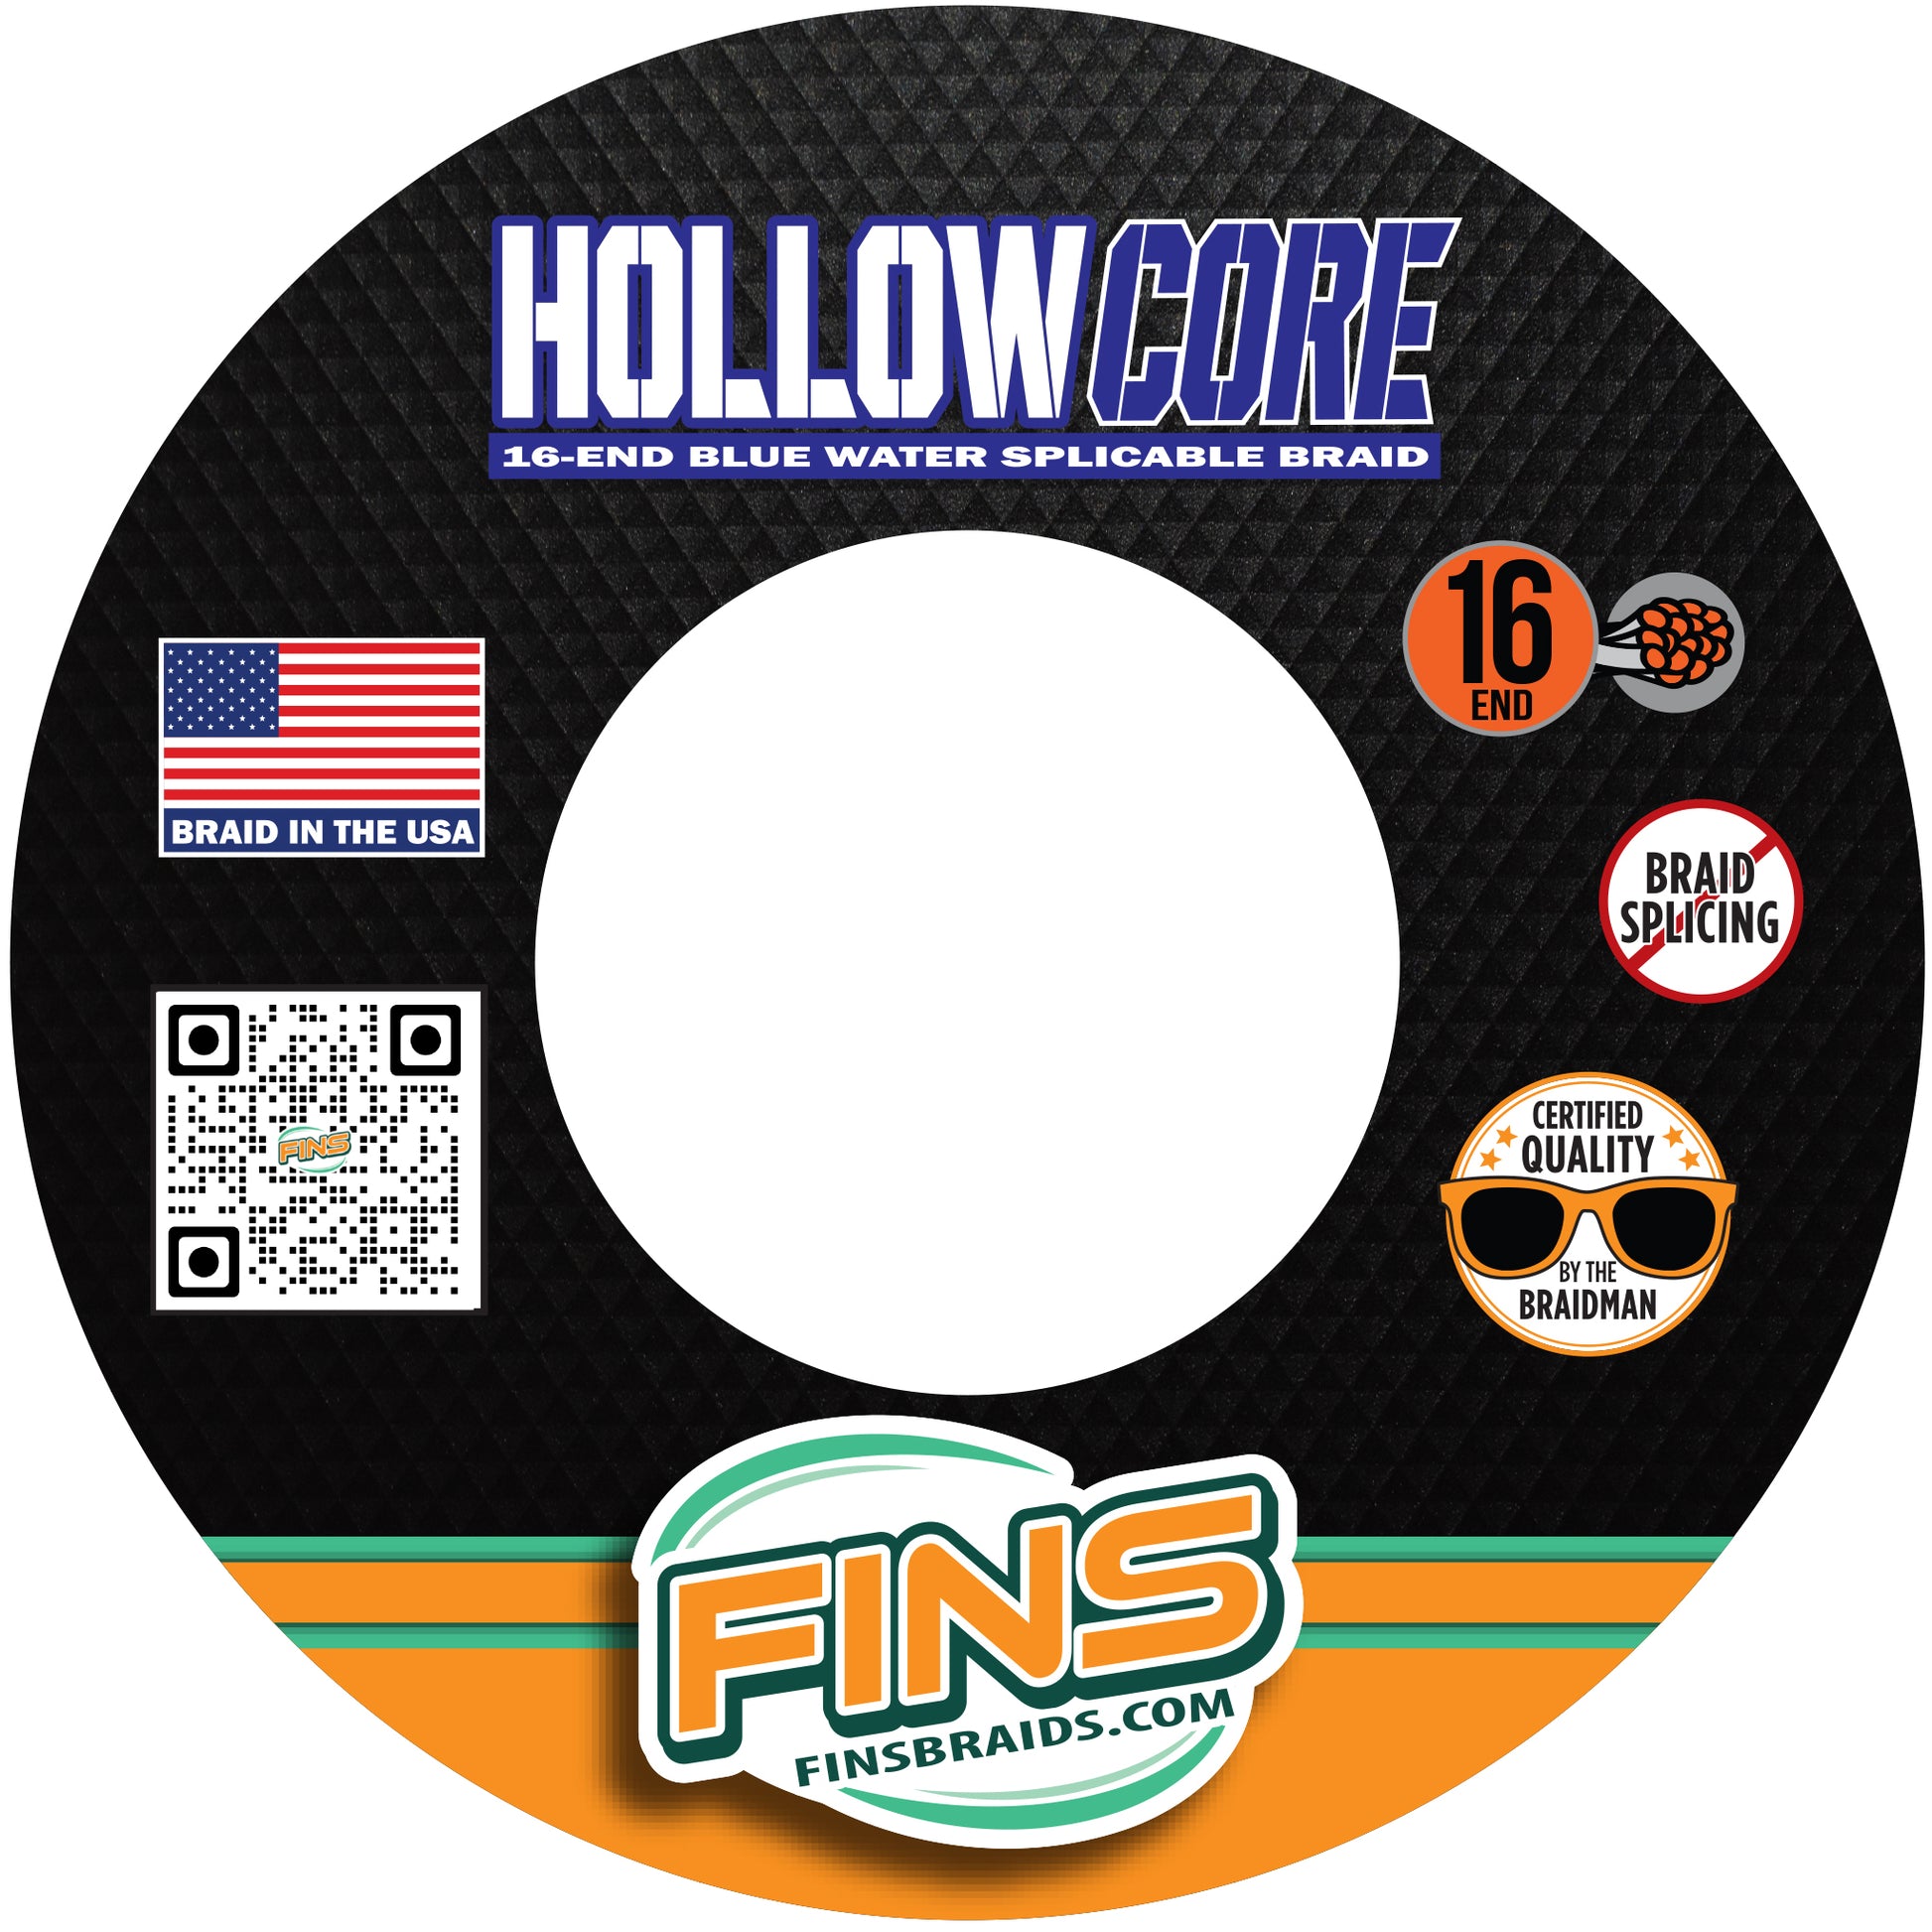 Hollow Core Braided Fishing Line